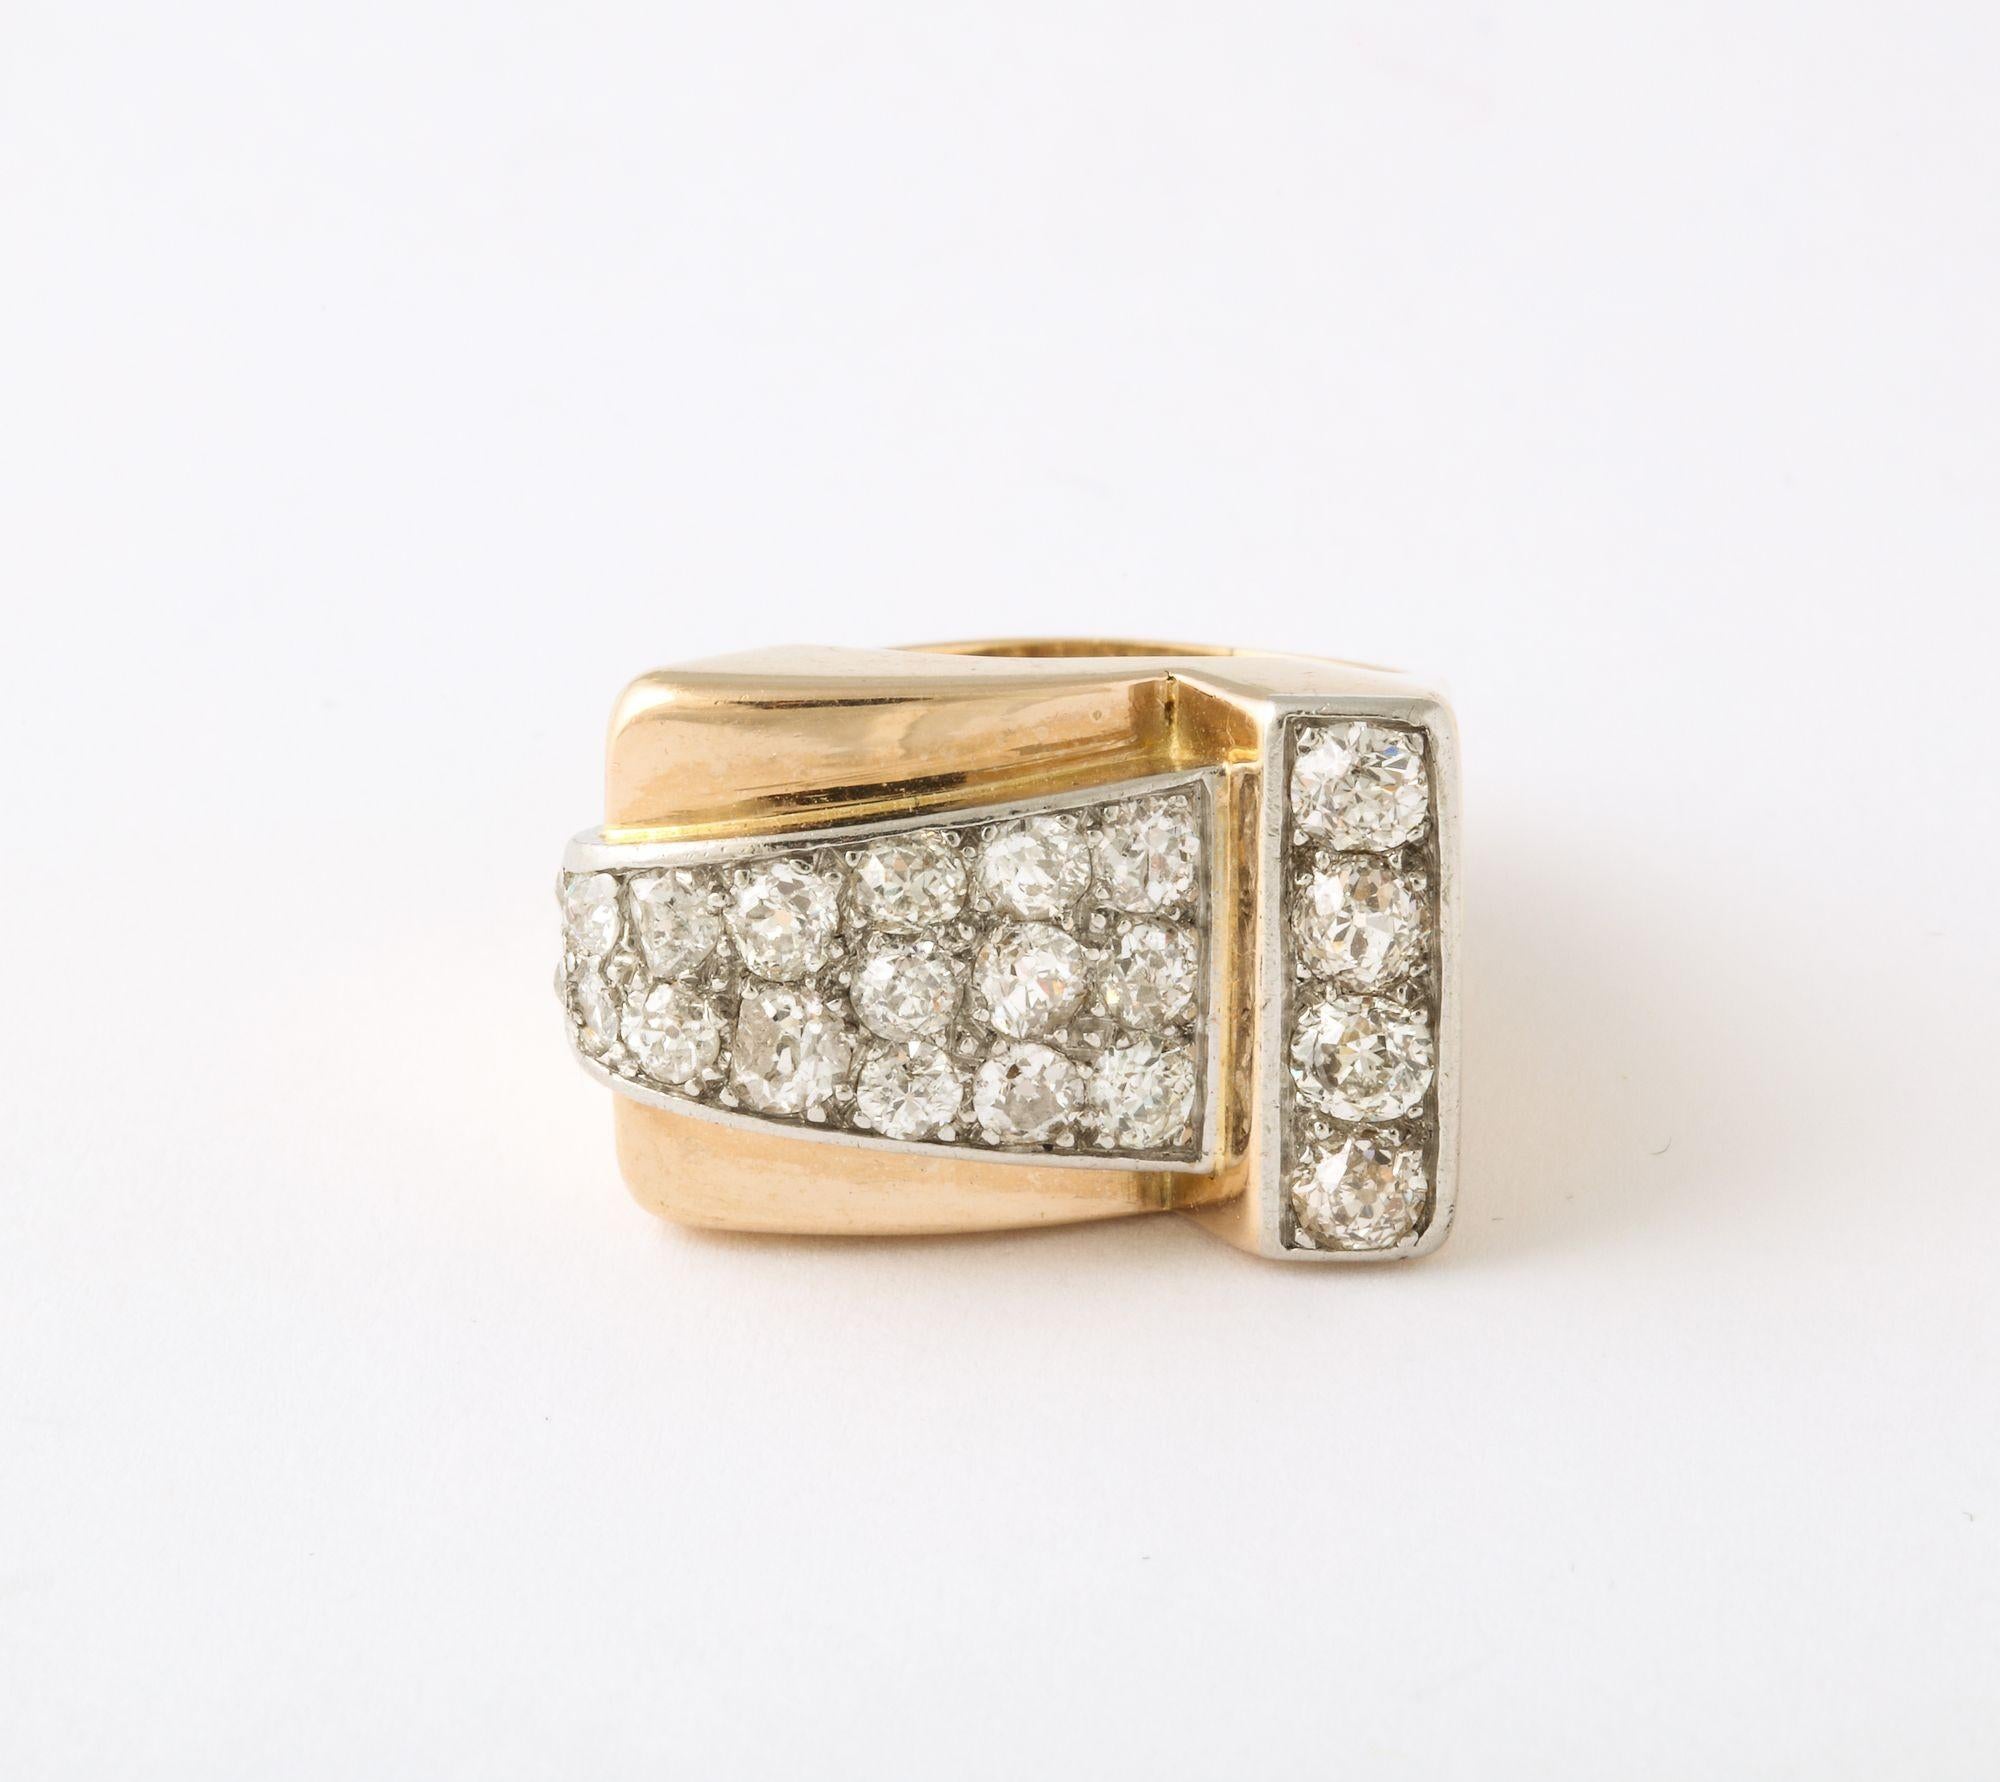 A classic early retro 18 k Gold ring with 2.50 cts of mine and European cut diamonds 